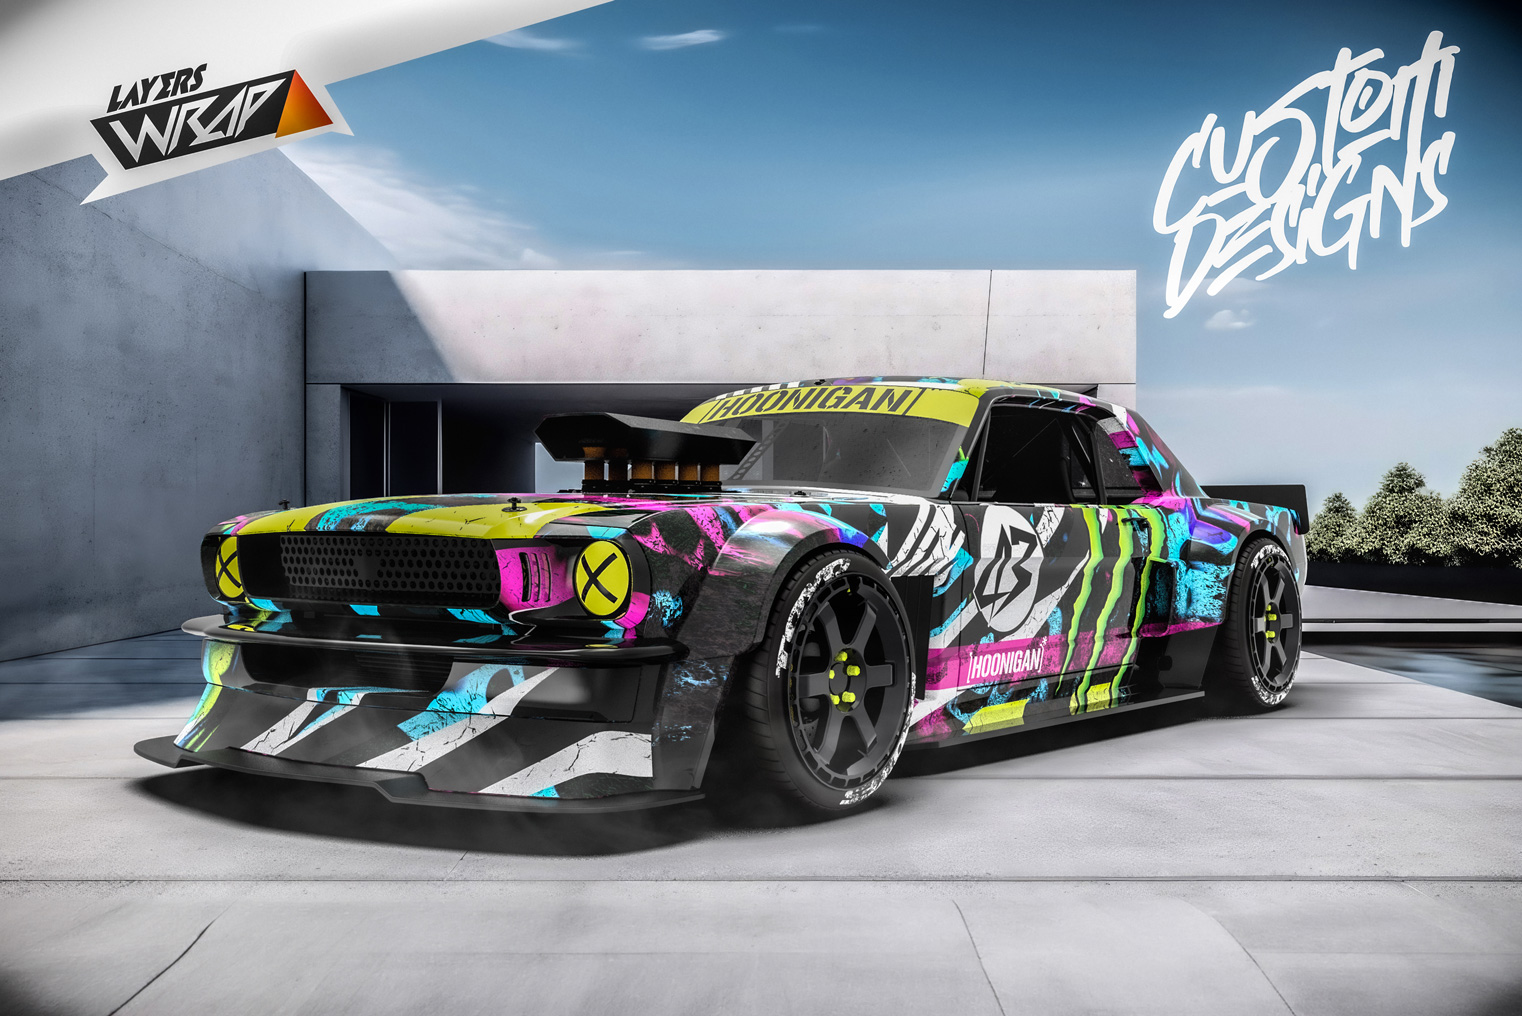 Unveiling the Hoonigan Ford Mustang Inspired Concept by Layers Wrap | Layers Wrap